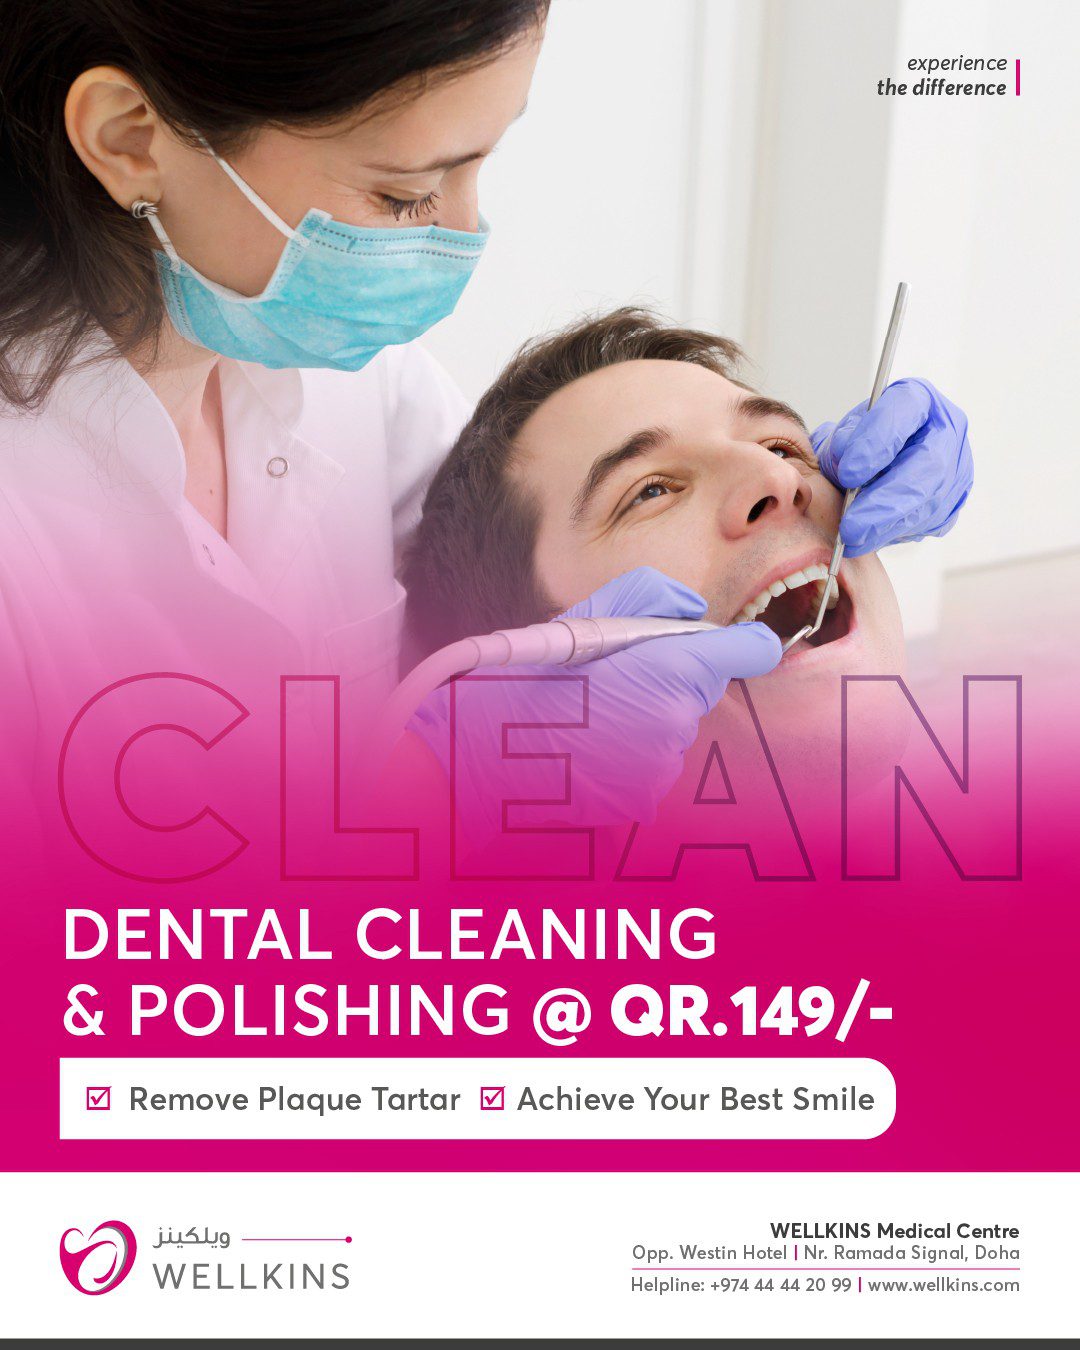 Get ready to show off your best smile with our special dental offer! For only QAR.149/-, you can enjoy cleaning, polishing, and a comprehensive dental examination at Wellkins Medical Centre. Don't miss out on this deal located just opposite Westin Hotel, Ramada Signal, Doha. Book your appointment now by clicking on this link: https://wellkins.com/dental-care/

 #DentalCare #WellkinsMedicalCentre #HealthySmile #QatarDeals